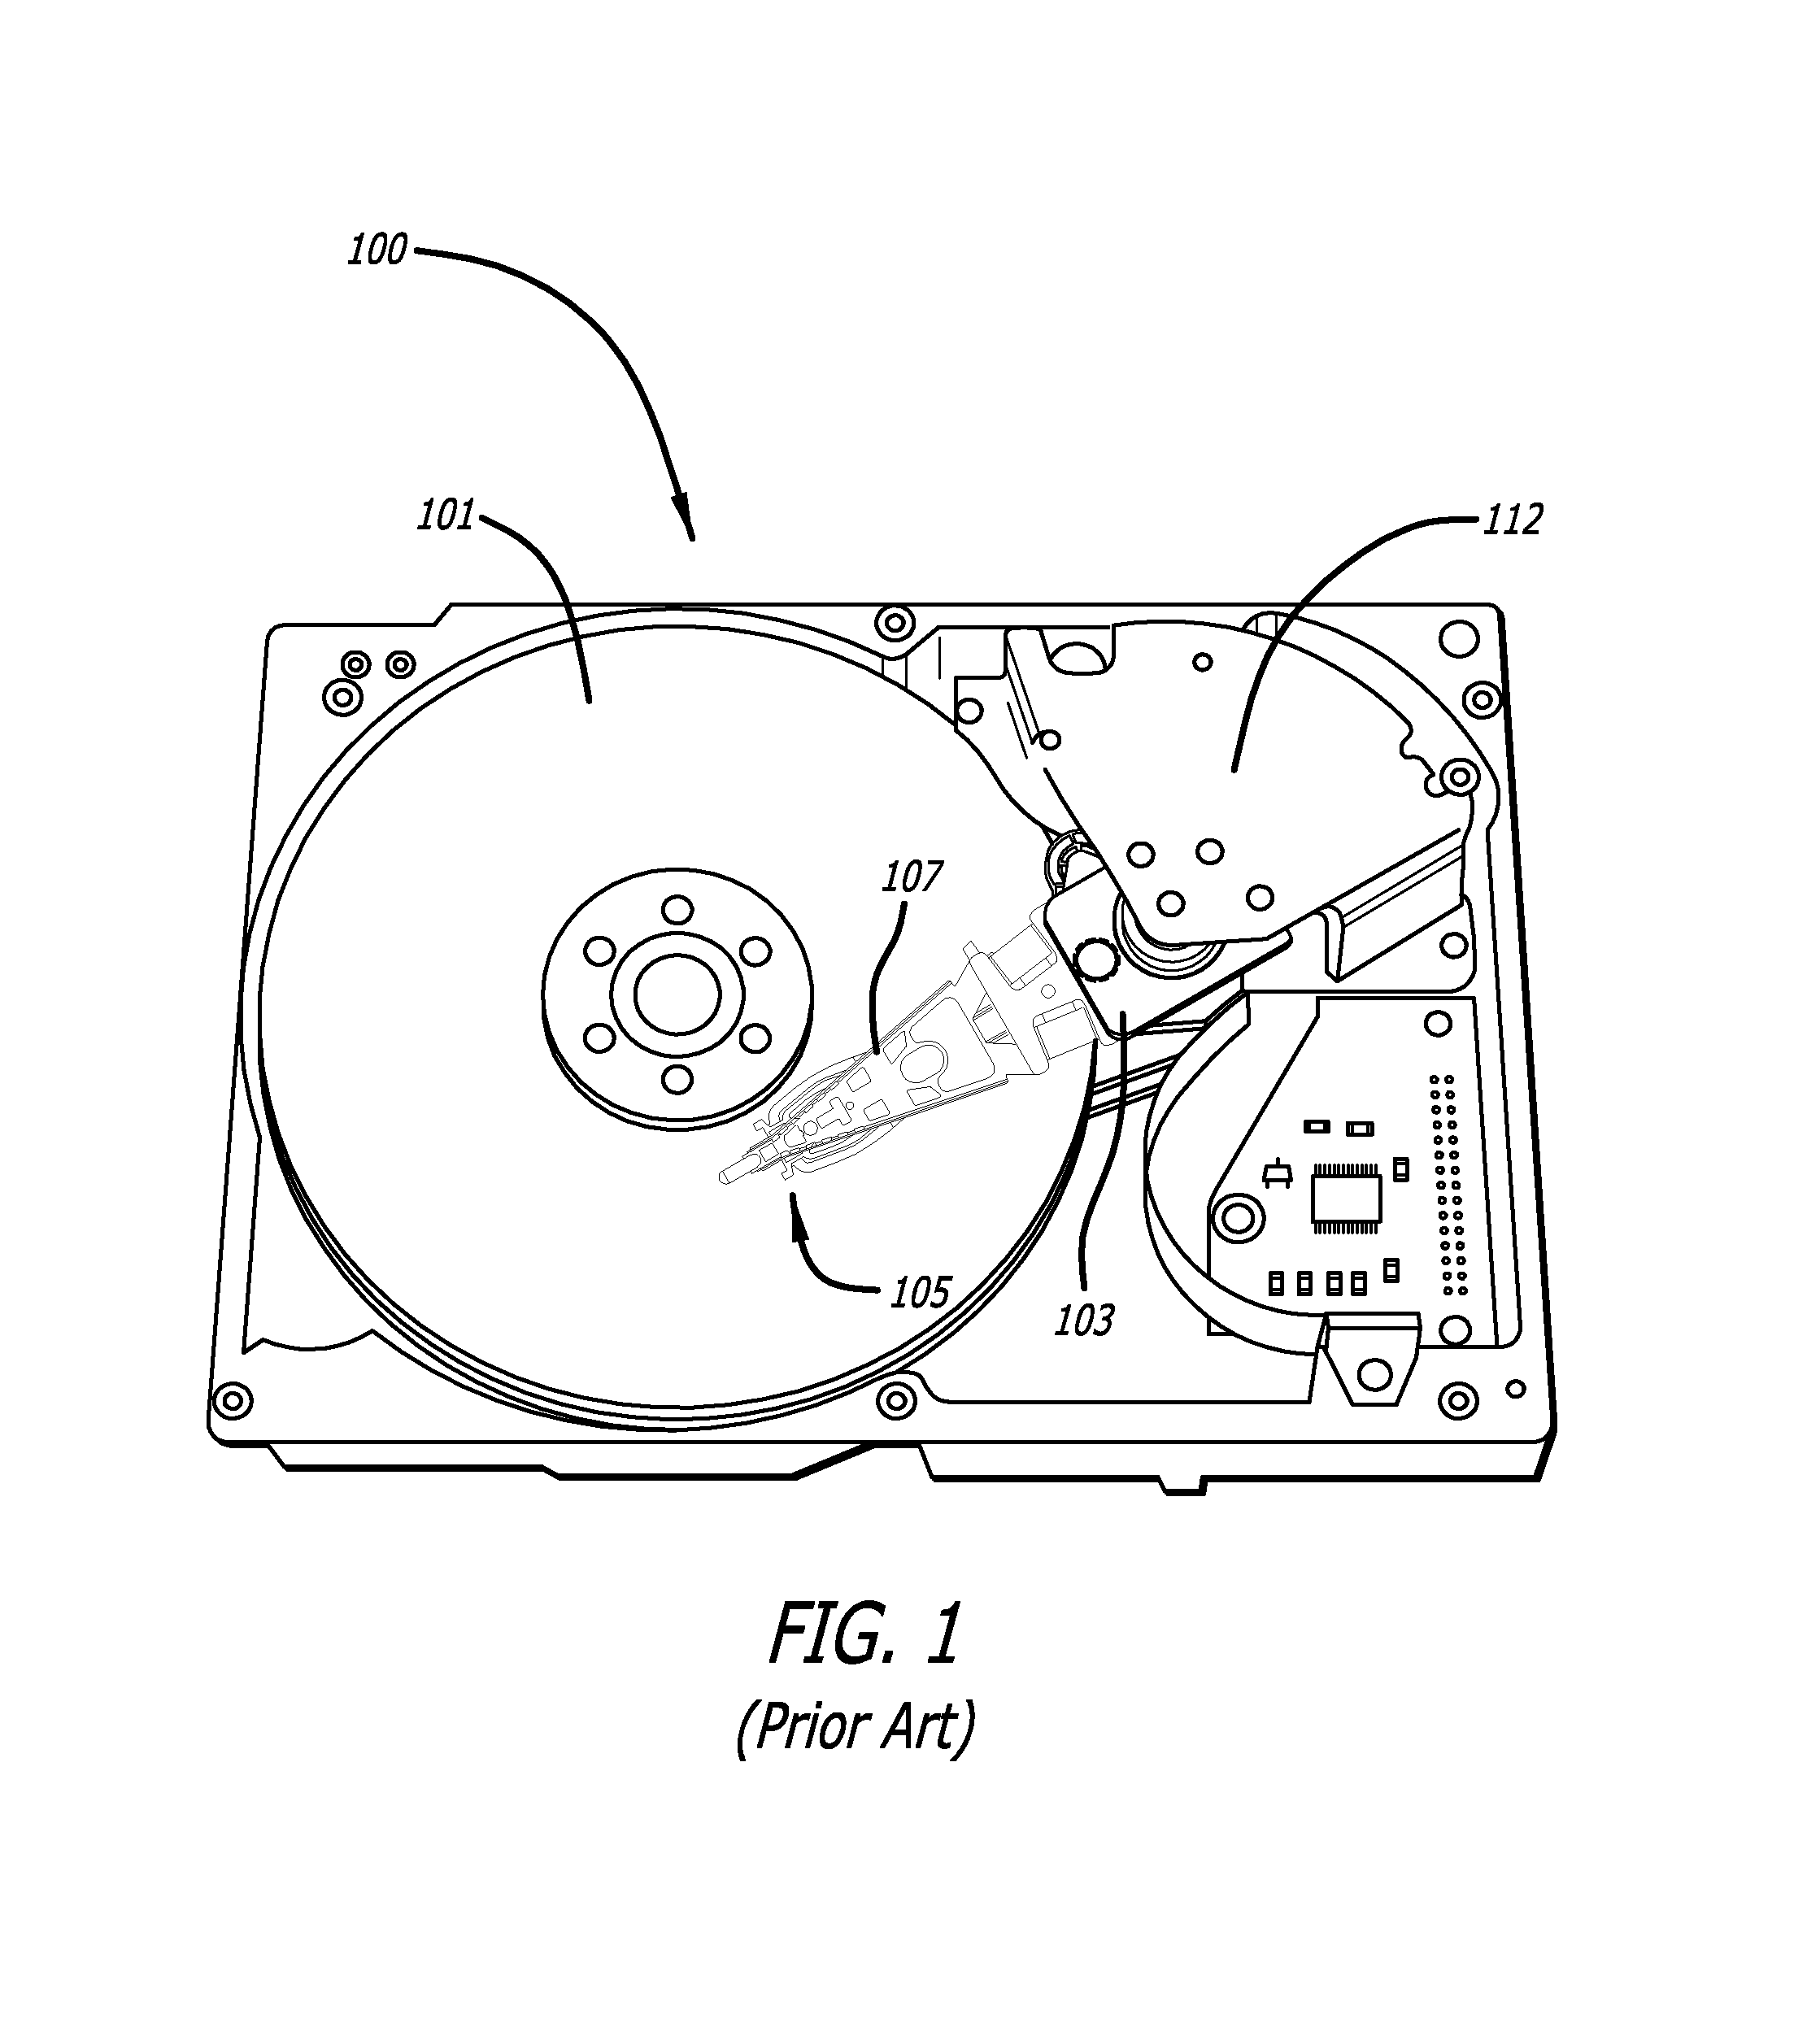 Electrical connections to a microactuator in a hard disk drive suspension